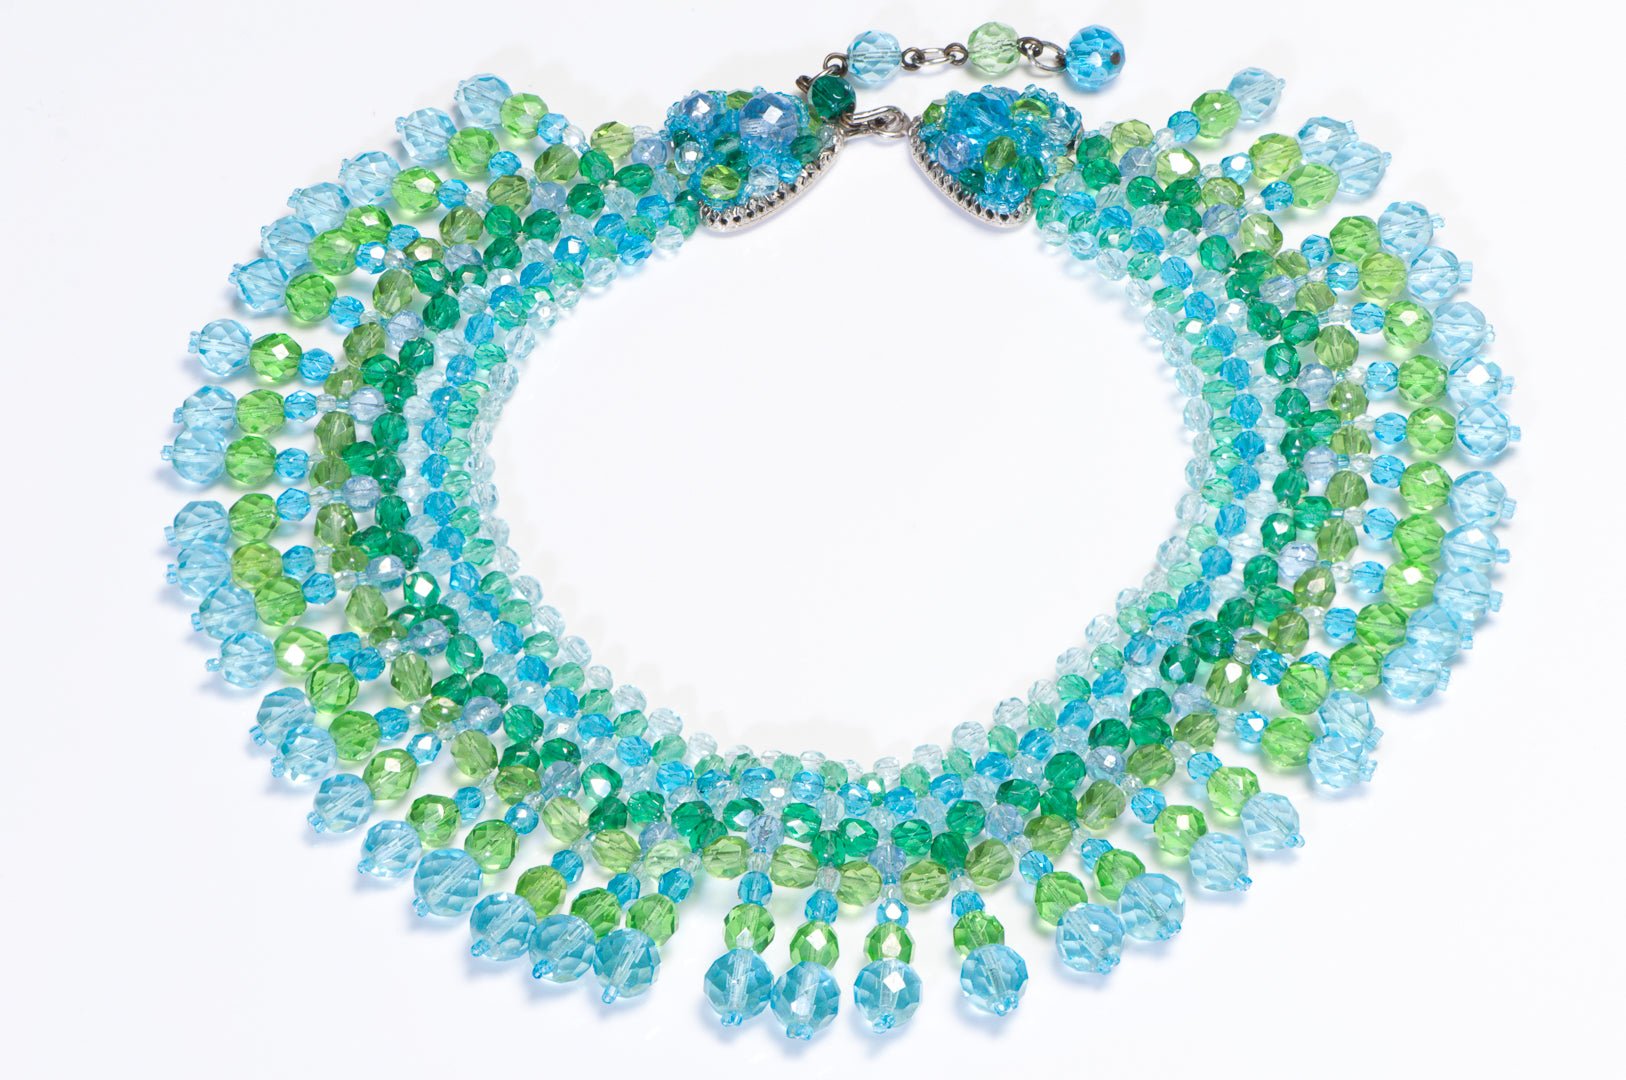 Coppola e Toppo 1960’s Emilio Pucci Green Blue Crystal Beads Collar Necklace - DSF Antique Jewelry